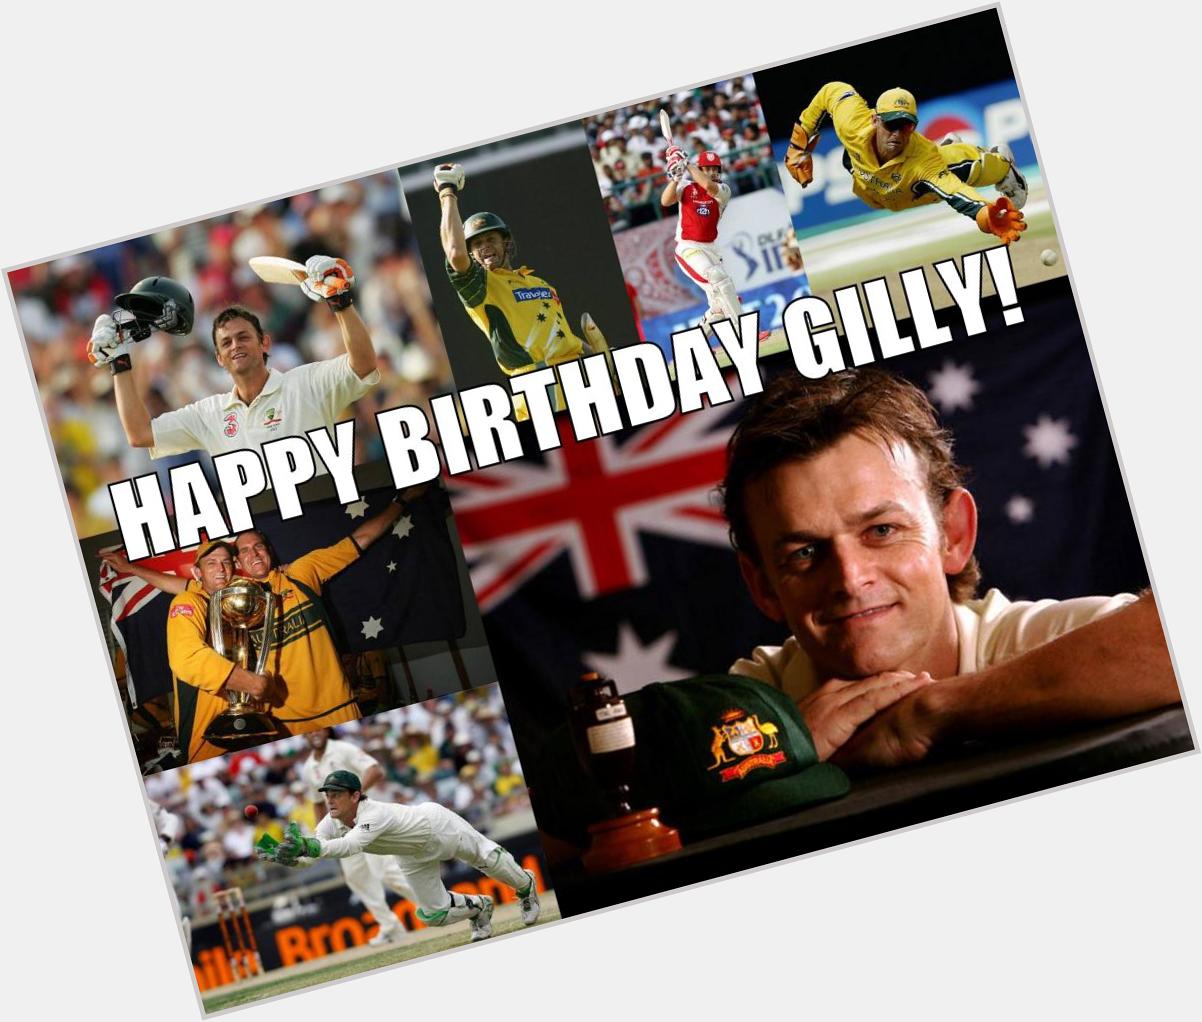 Adam Gilchrist played 3 world cups and won 3 of them in a row. Happy birthday gilly  